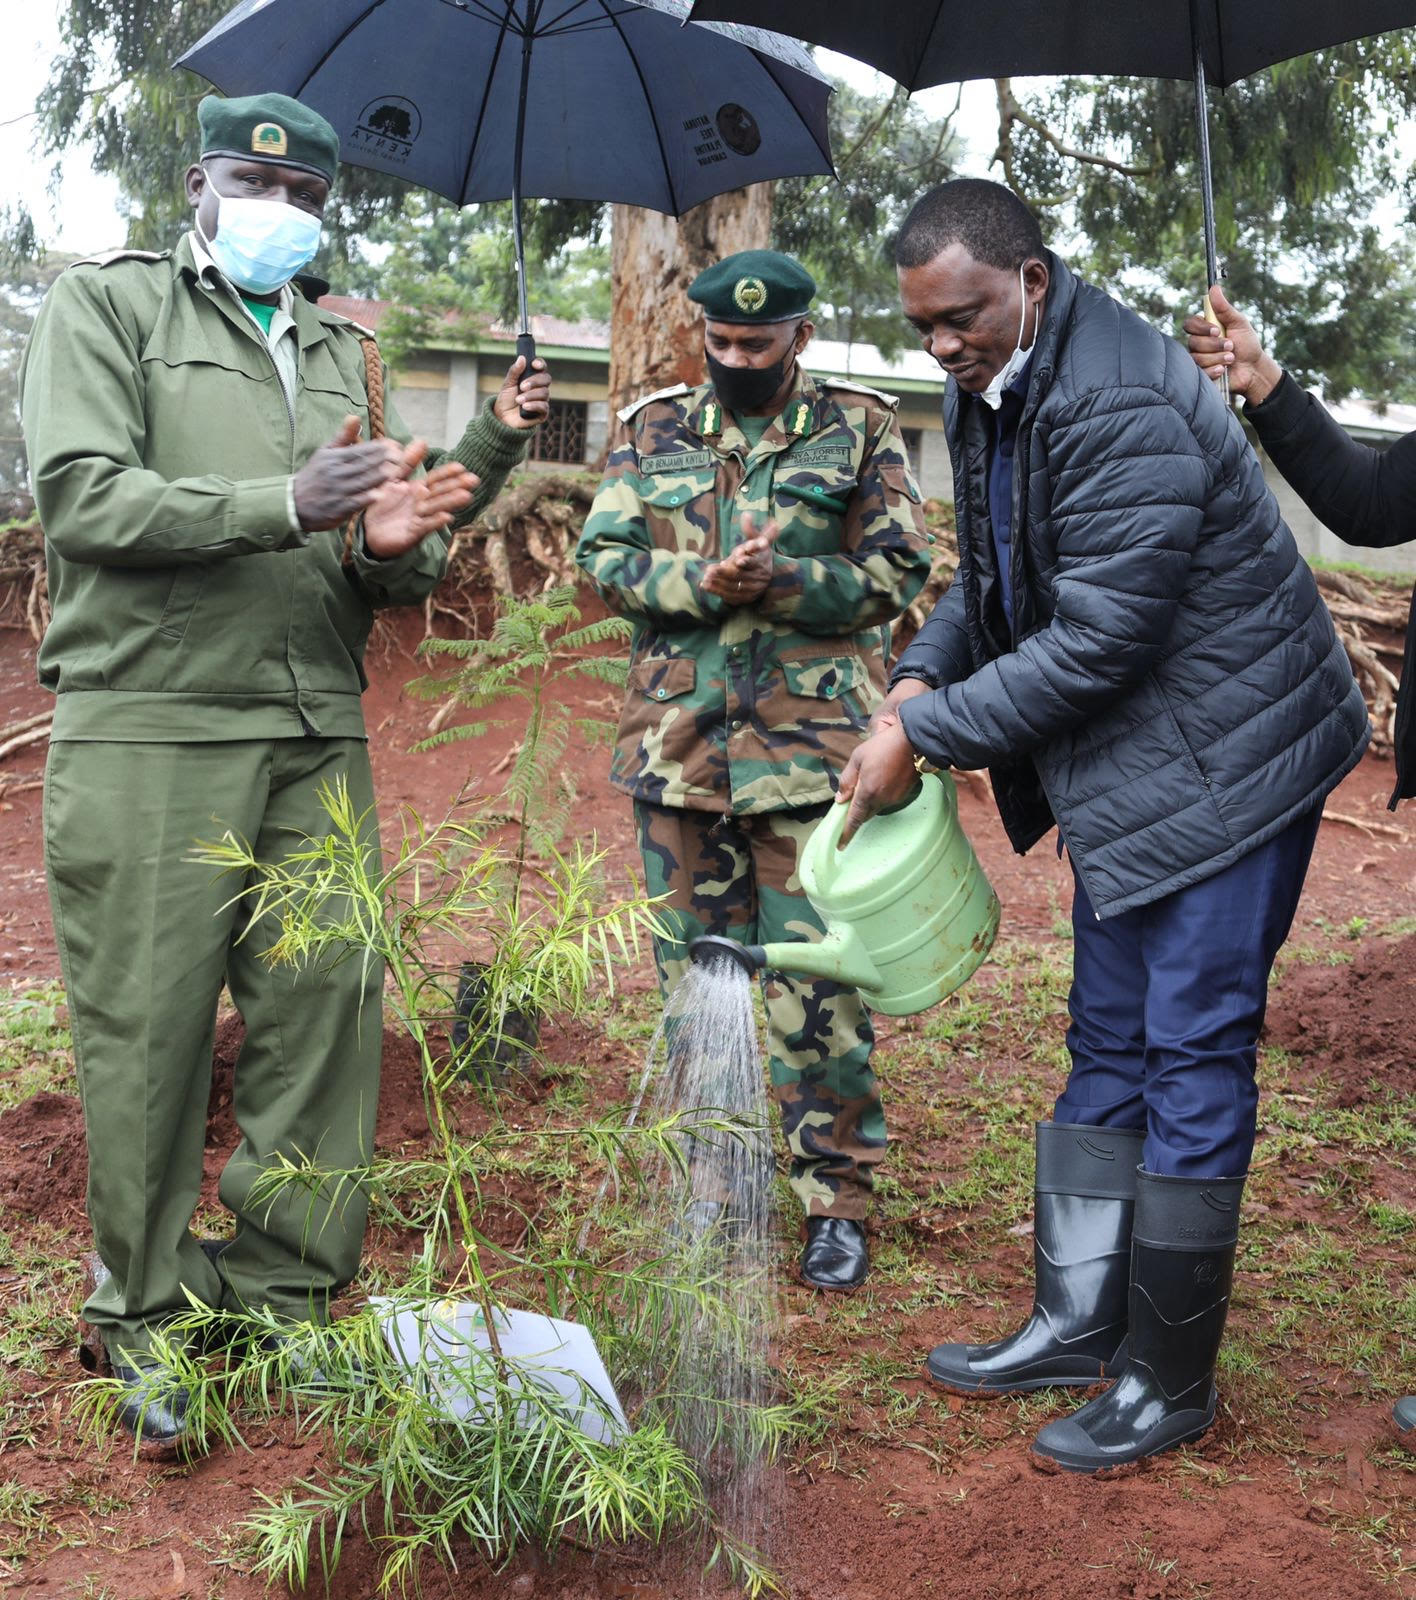 The National Assembly in Collaboration with the Kenya Forest Service, Ministry of Environment & Natural Resources,  the County Government of Kajiado, and the Church of Jesus Christ of the Latter Day Saints; today launched a Nationwide tree planting exercise with an aim of attaining the National Government’s target of achieving and maintaining over 10% tree cover by the year 2022.  The National Assembly Speaker the Right Hon Justin Muturi officially launched the tree-planting project at the Upper Matasia Pri